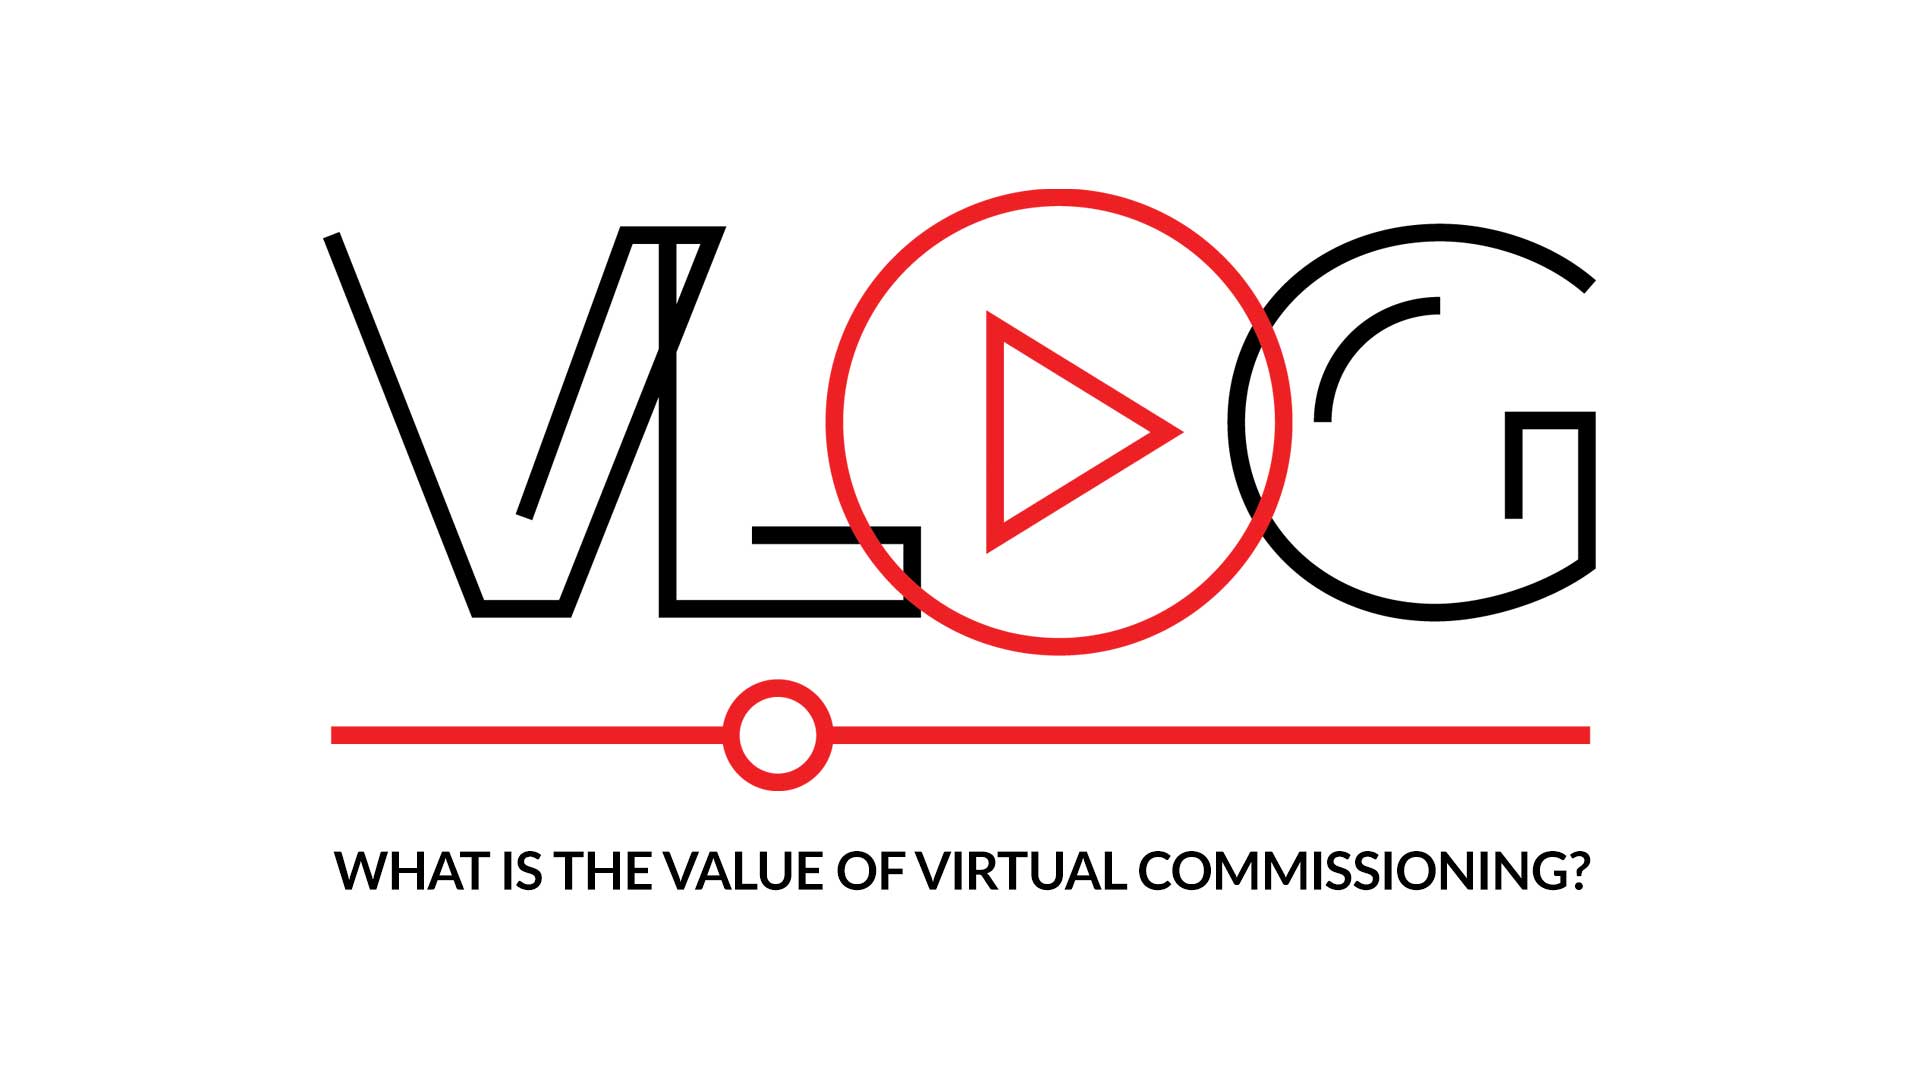 What is the value of virtual commissioning?